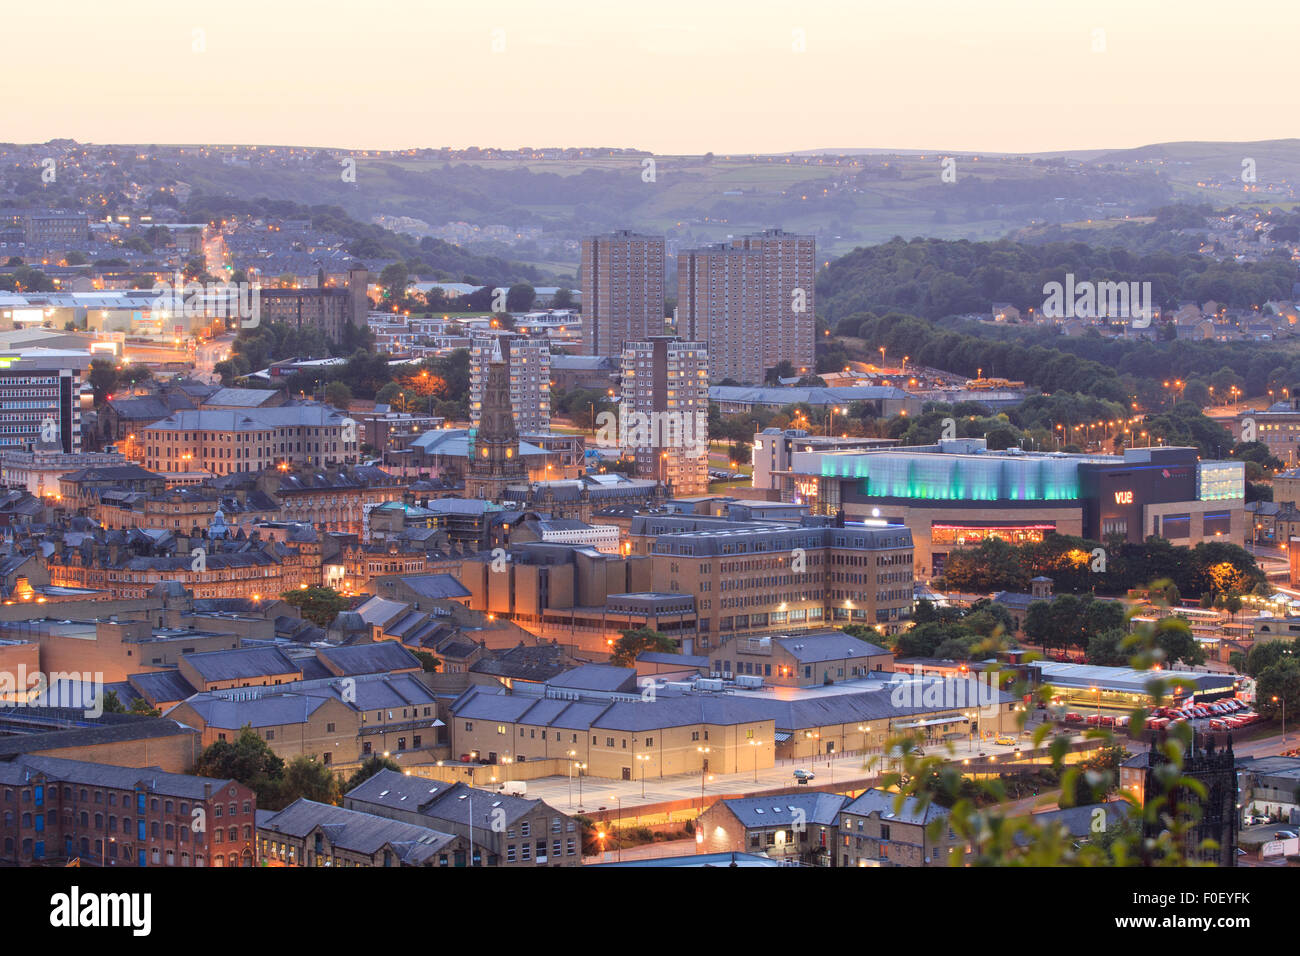 Halifax, England - august 12th, 2015: Halifax town centre at dusk with the vue cinema at broad street plaza  12th august, 2015 i Stock Photo